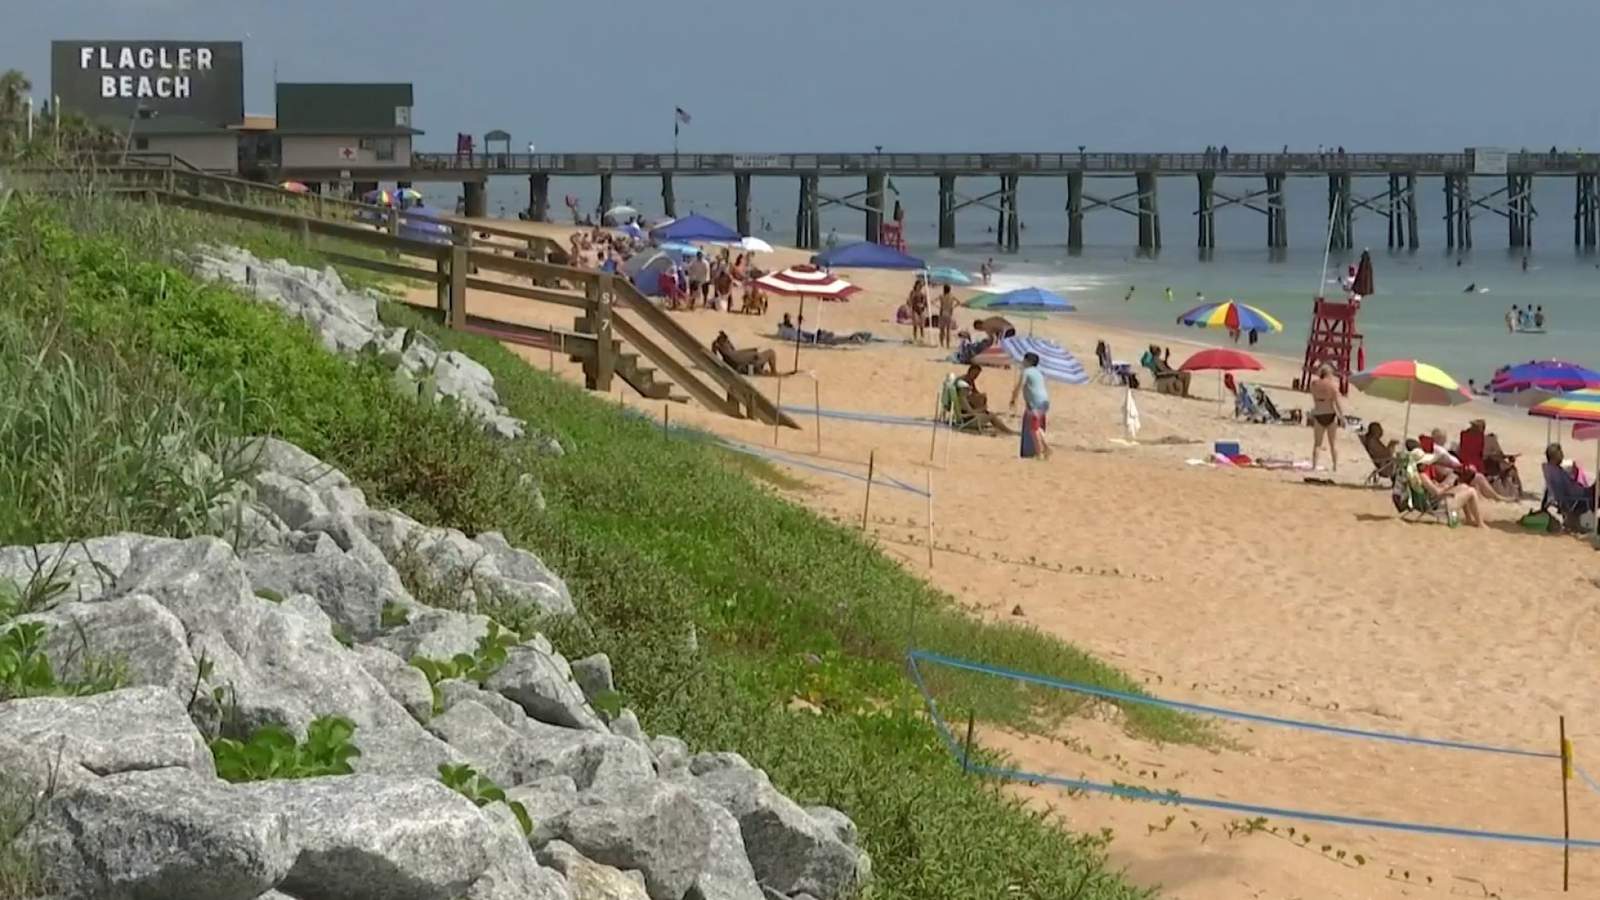 Volusia, Flagler beaches prepare for busy holiday weekend with added COVID-19 precautions